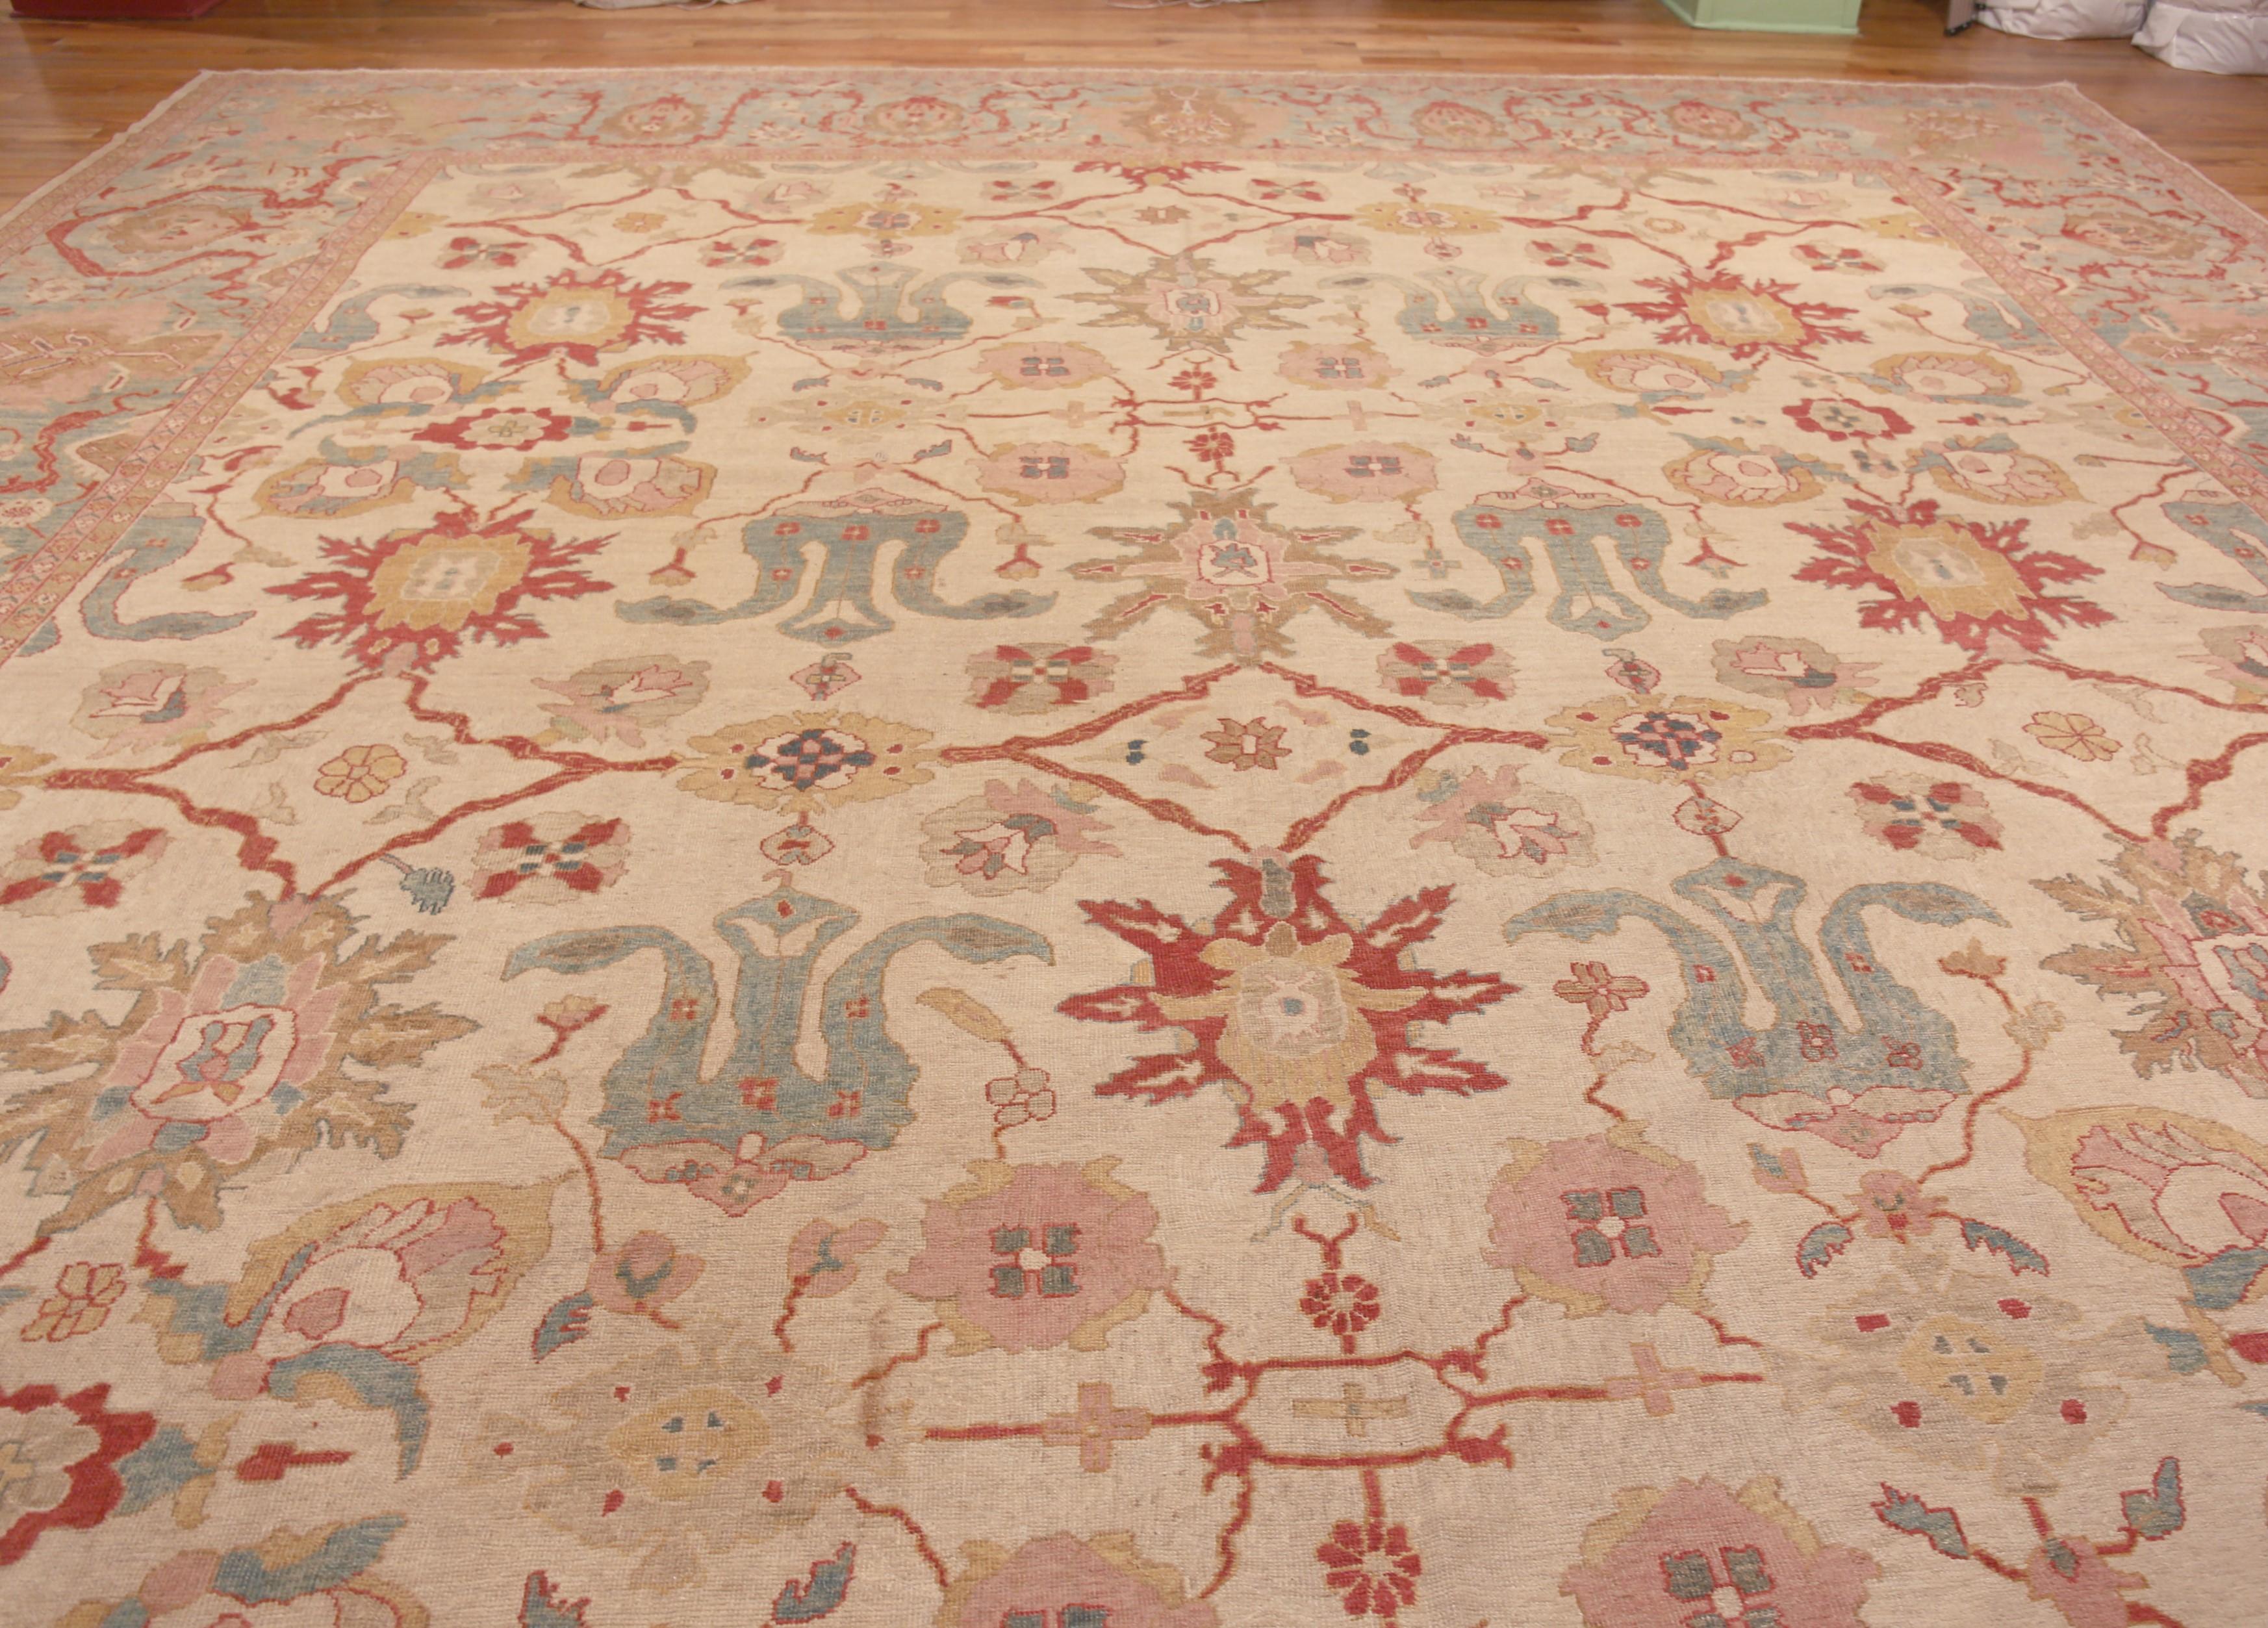 Oversized Ivory Happy Jewel Tone Antique Persian Sultanabad Rug 18'2